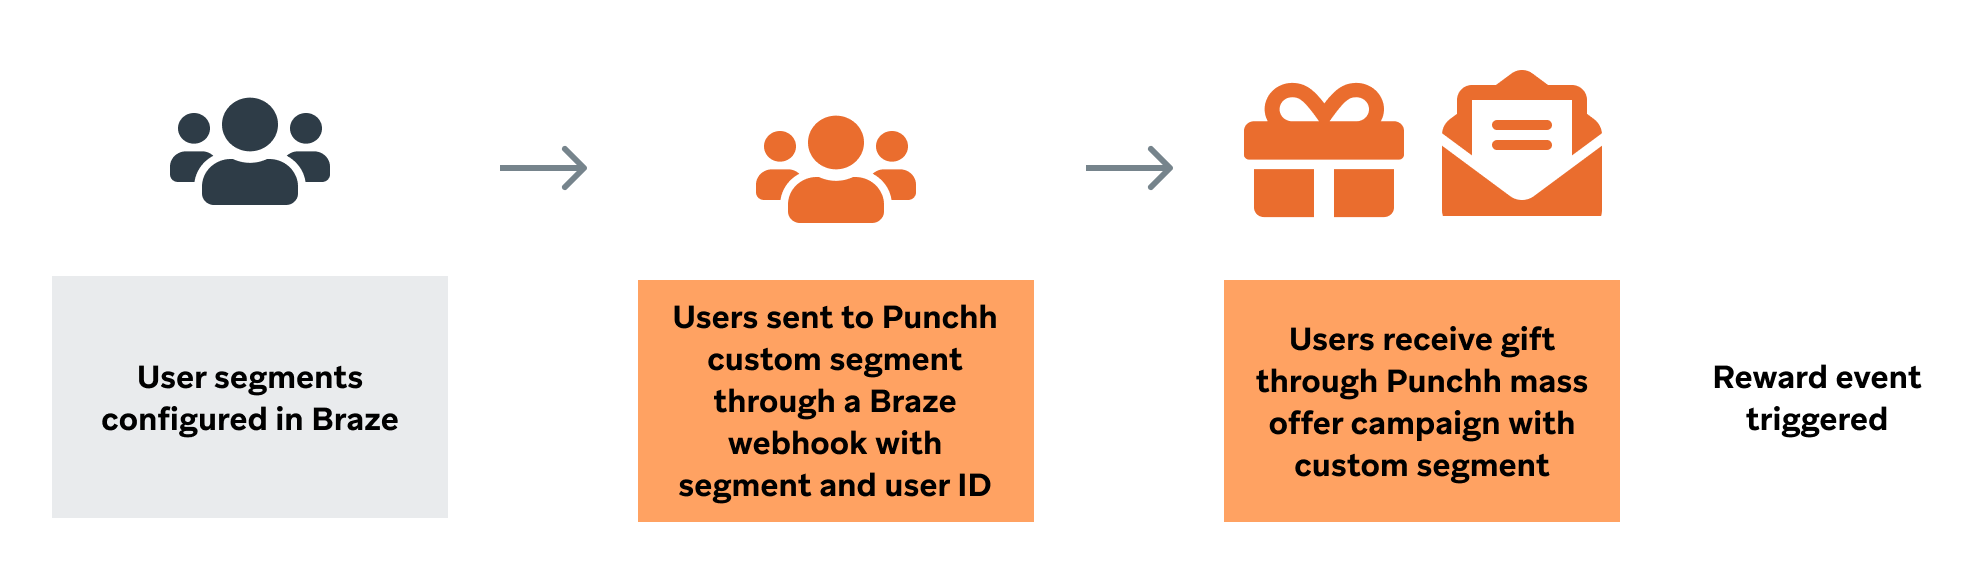 A user segment can be configured in Braze, and then a message can be sent from Braze to Braze segment. Next, the users are sent to the Punchh custom segment through a Braze webhook with segment and user ID. After this, the user receives a gift through Punchh mass offer campaign with a custom segment. After this the reward event is triggered.